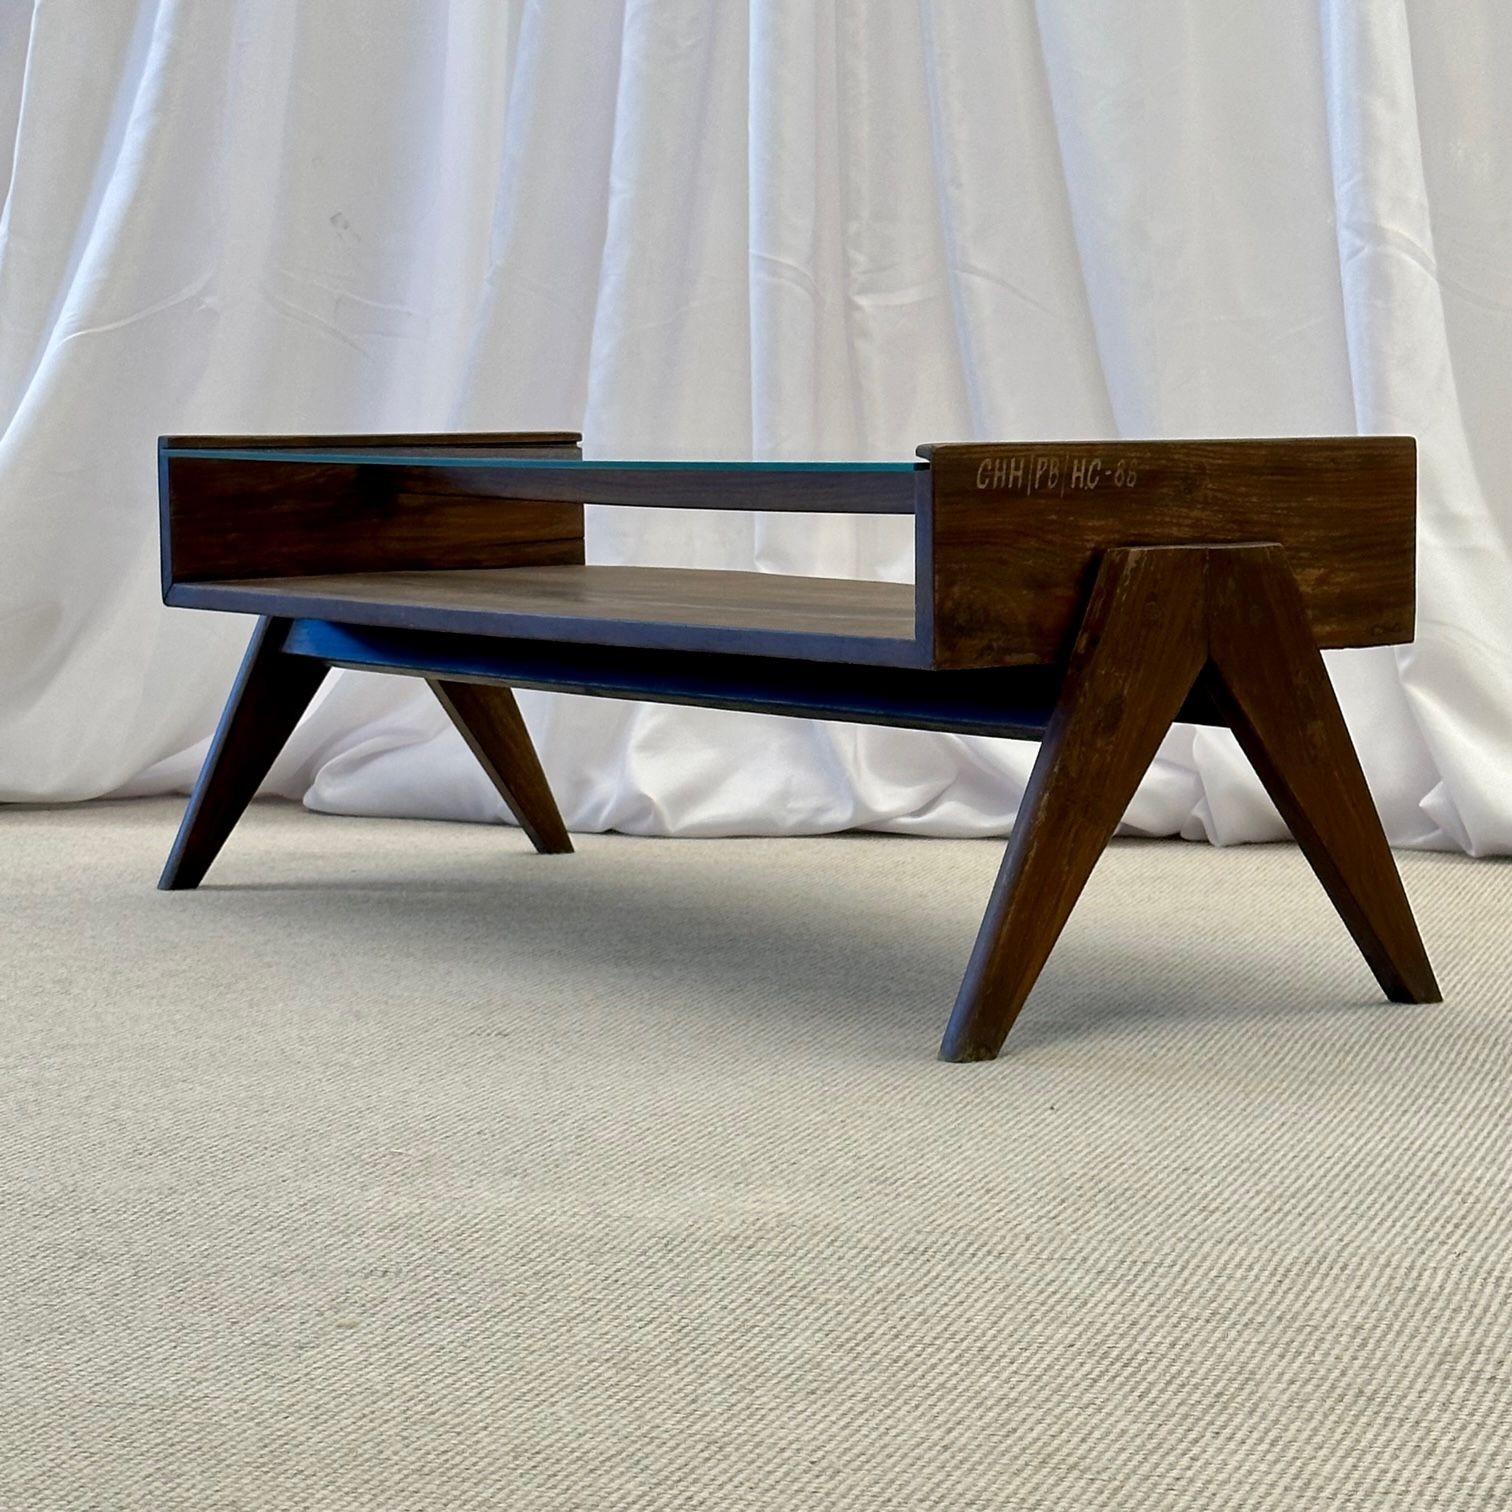 Pierre Jeanneret Rectangular Glass Coffee Table, Model PJ-TB-05-A
 
This collector's coffee table features the signature compass V-leg base, open cabinet concept center shelf, glass top and tapered legs.
 
France, India, c. 1960s
Teak, Glass
 
With